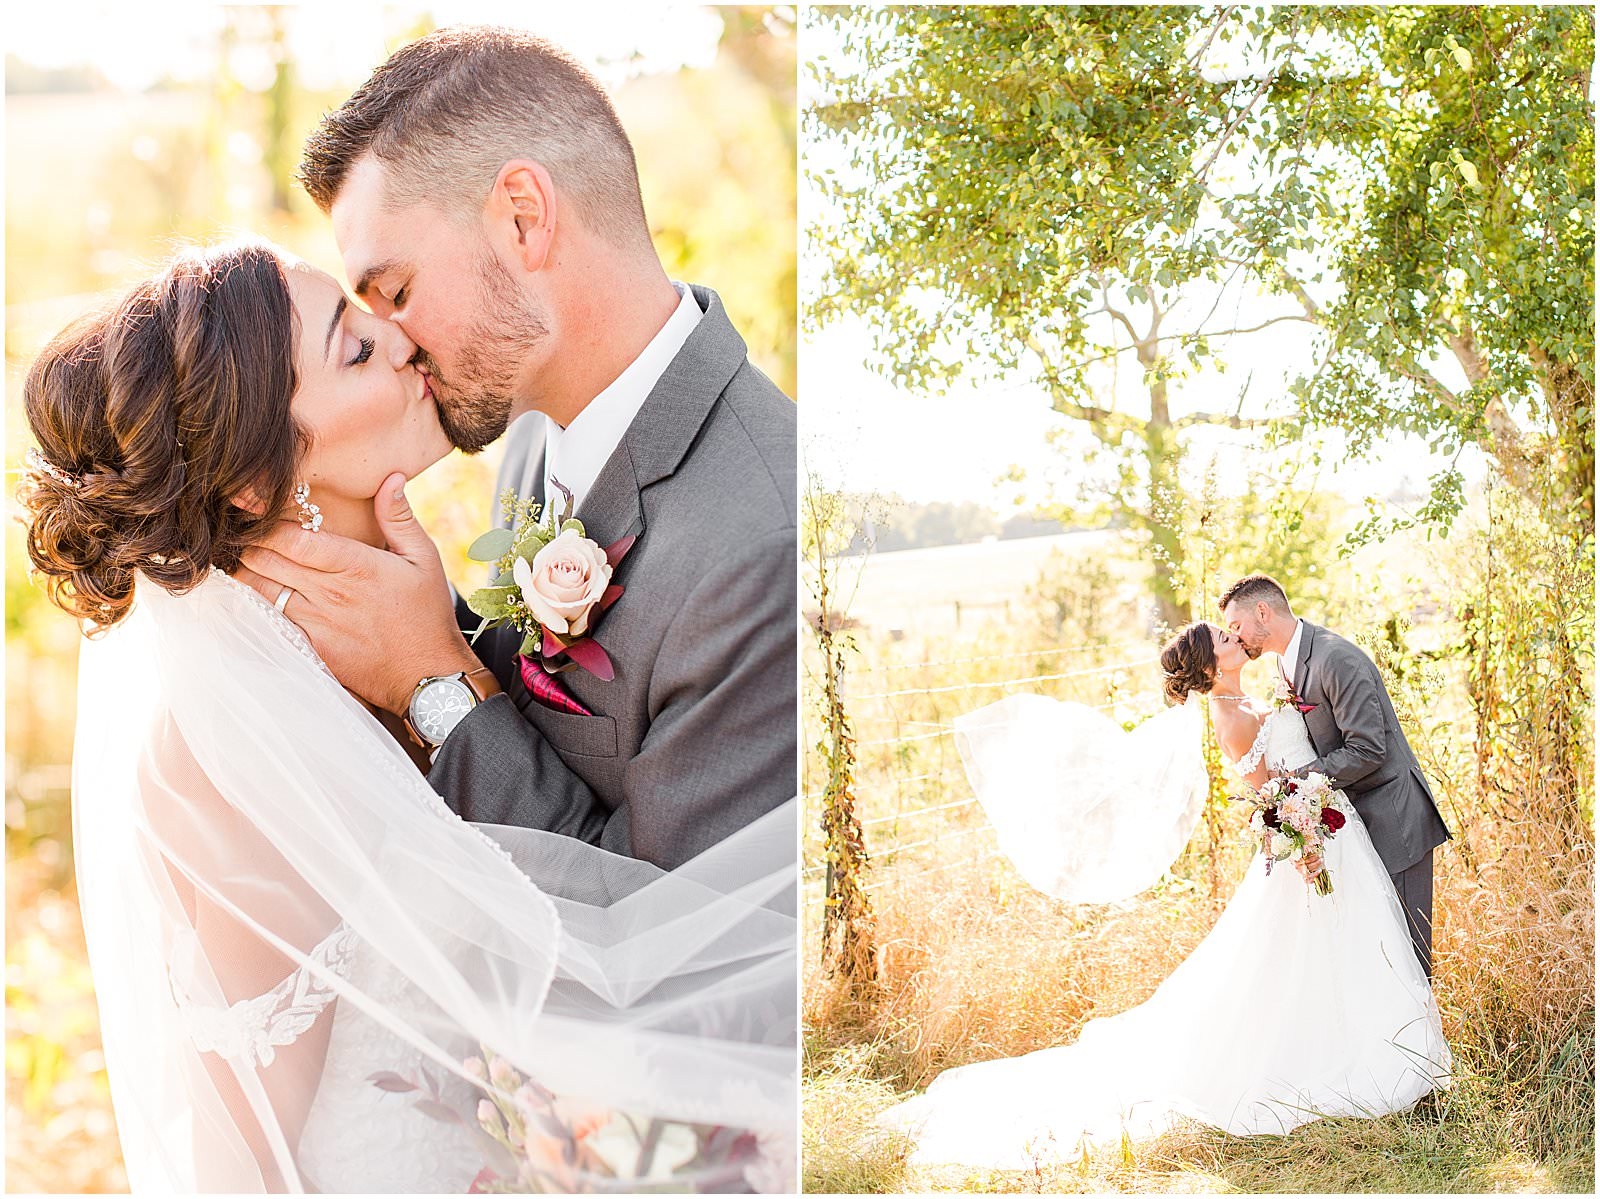 A Stunning Fall Wedding in Indianapolis, IN |. Sally and Andrew | Bret and Brandie Photography 0127.jpg